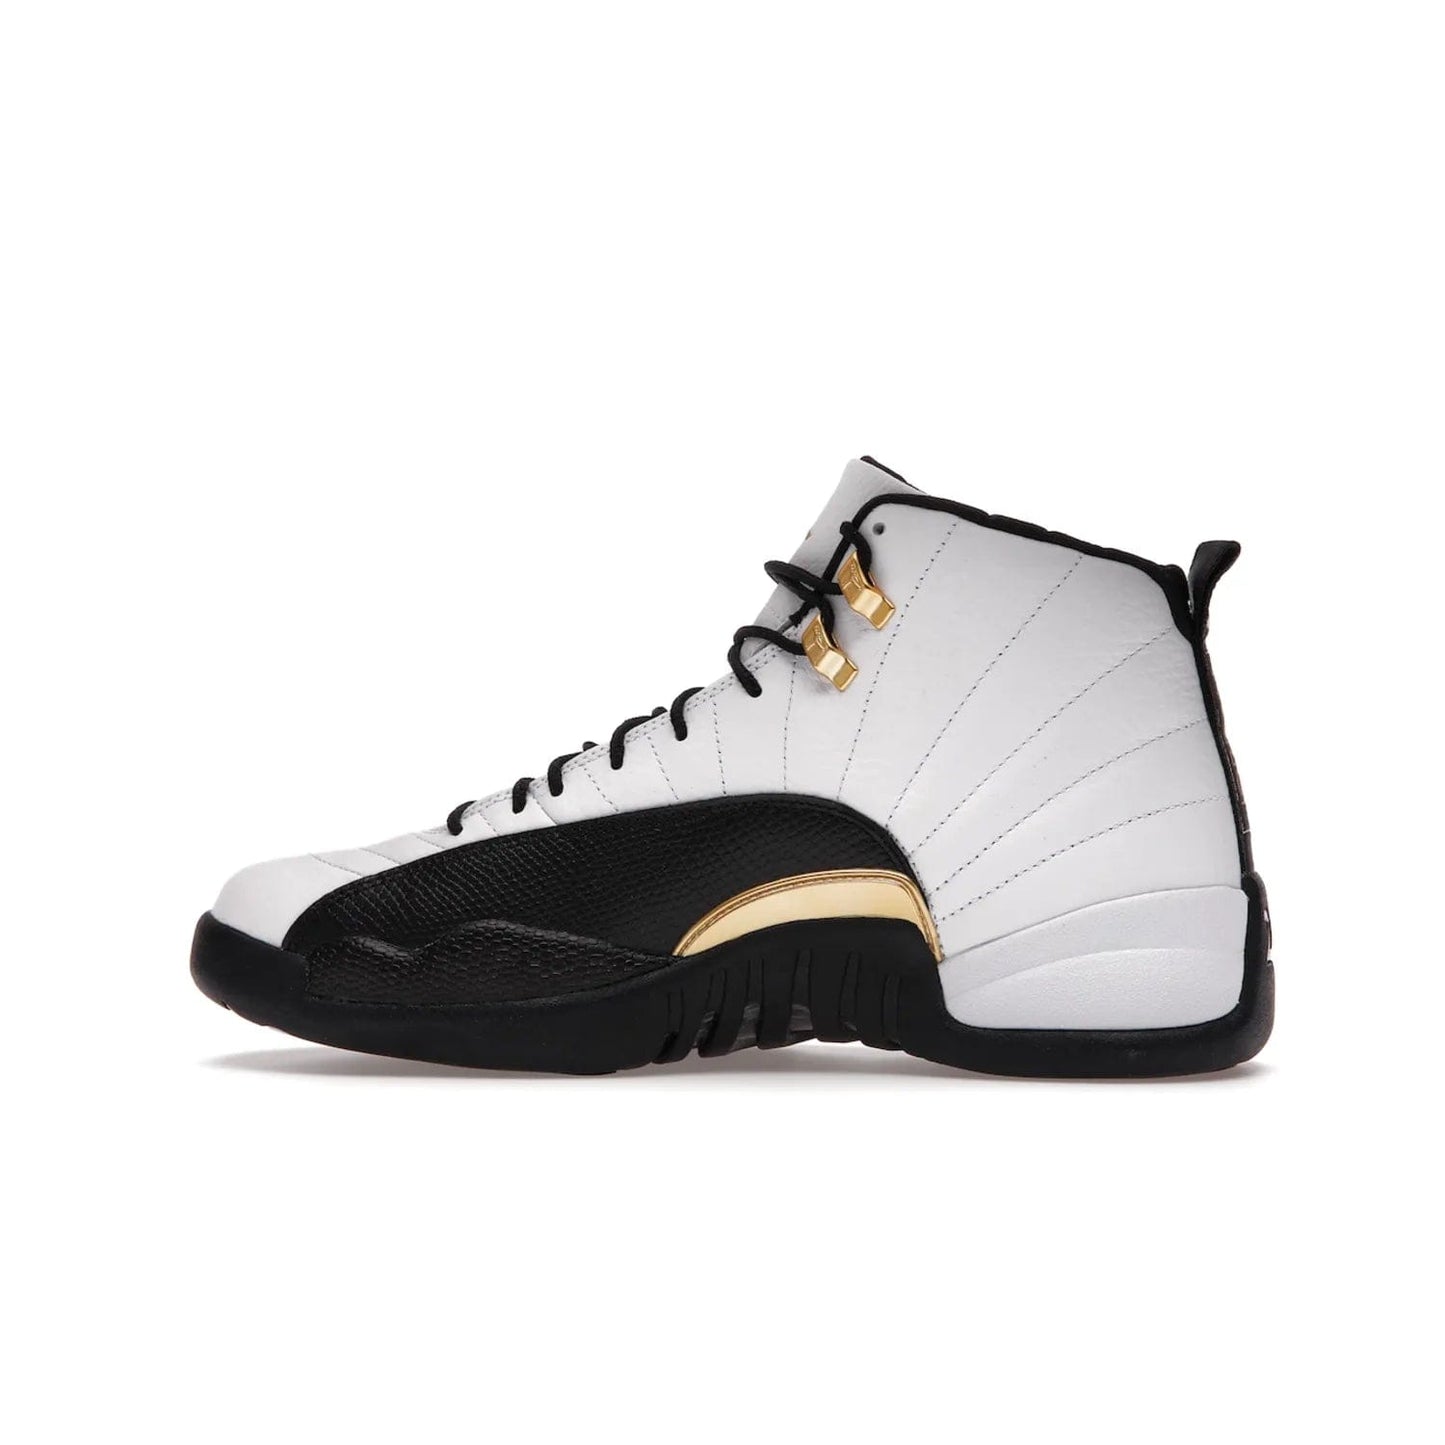 Jordan 12 Retro Royalty Taxi - Image 20 - Only at www.BallersClubKickz.com - Make a statement with the Air Jordan 12 Retro Royalty Taxi. Woven heel tag, gold plaquet, white tumbled leather upper plus a black toe wrap, make this modern take on the classic a must-have. Available in November 2021.